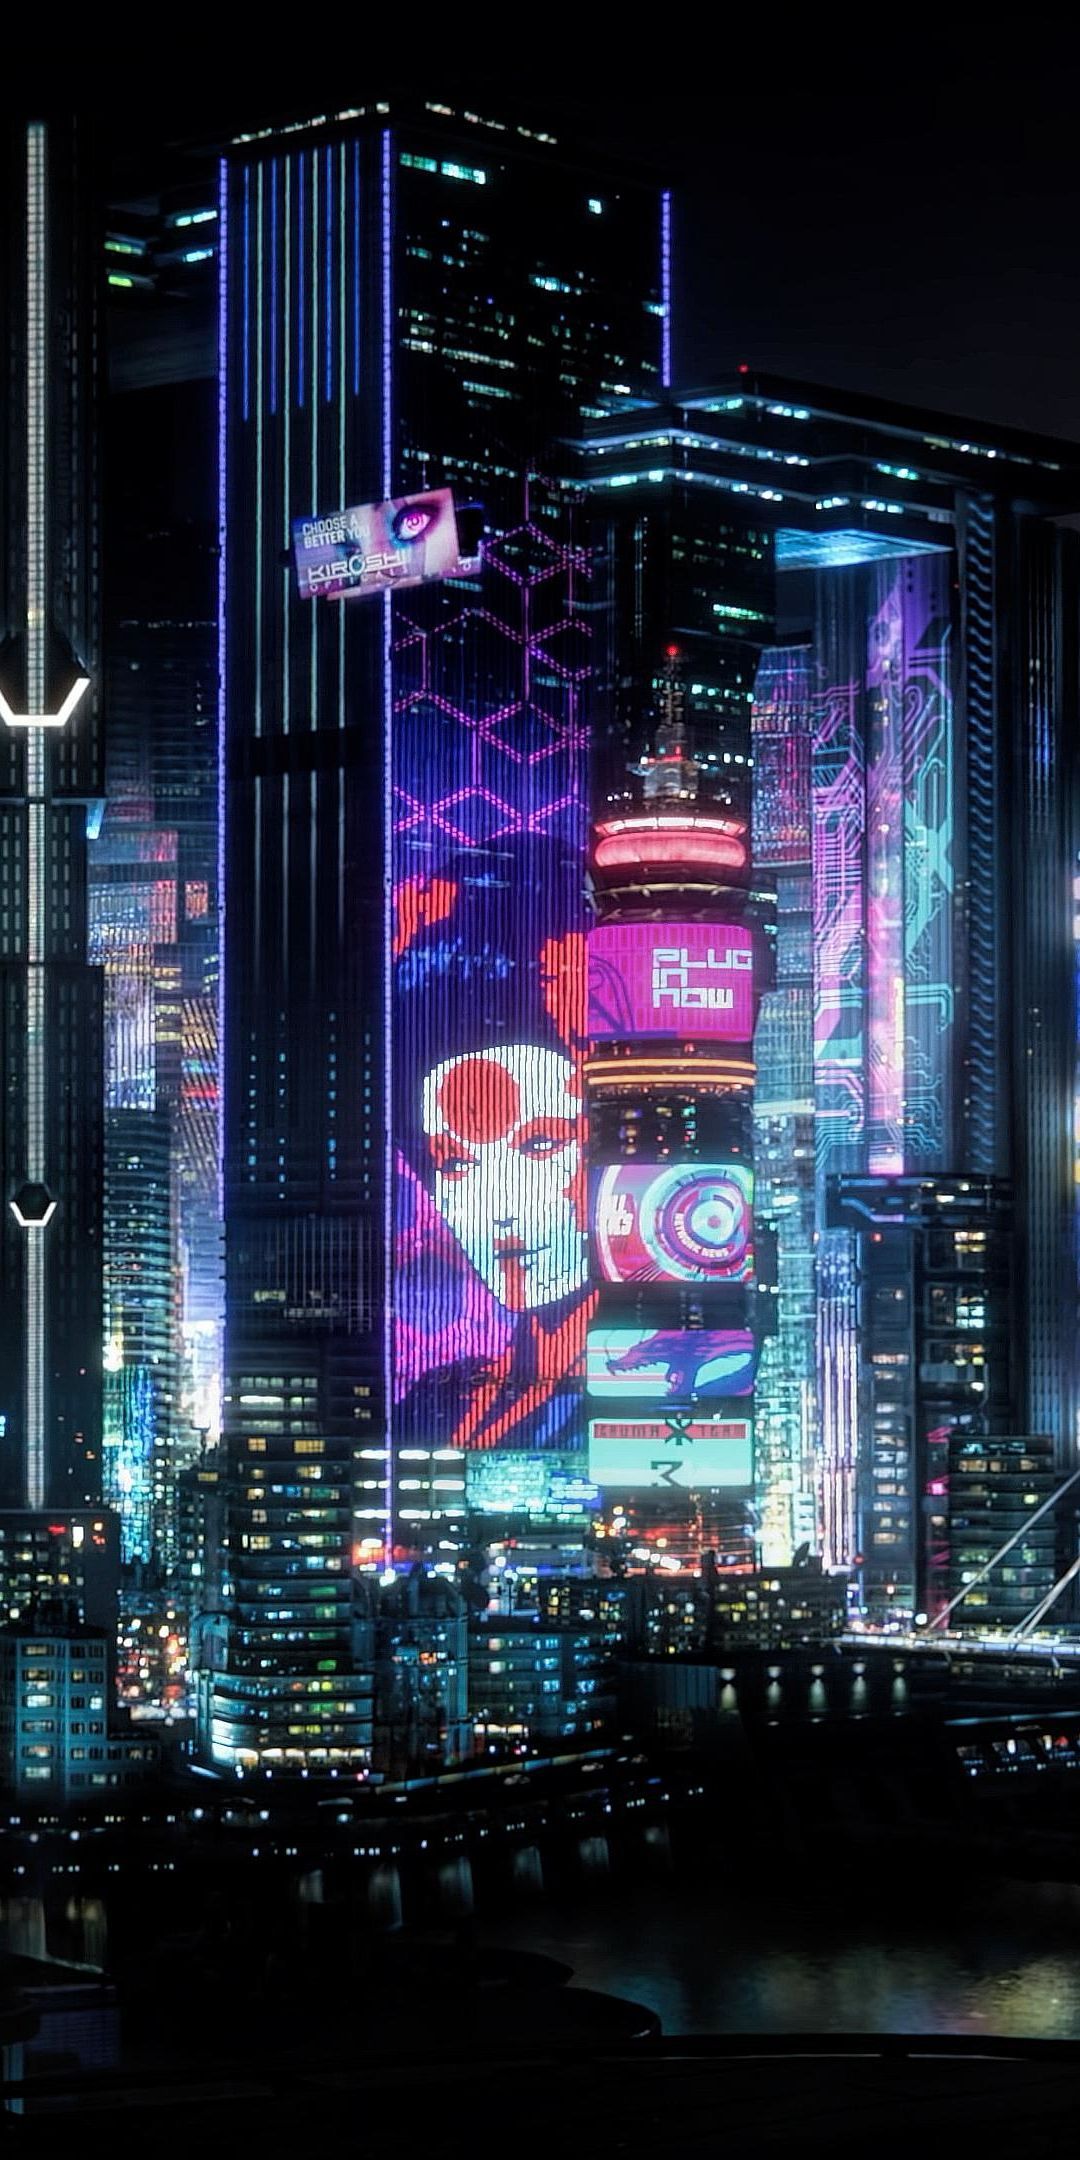 cyberpunk android Wallpapers